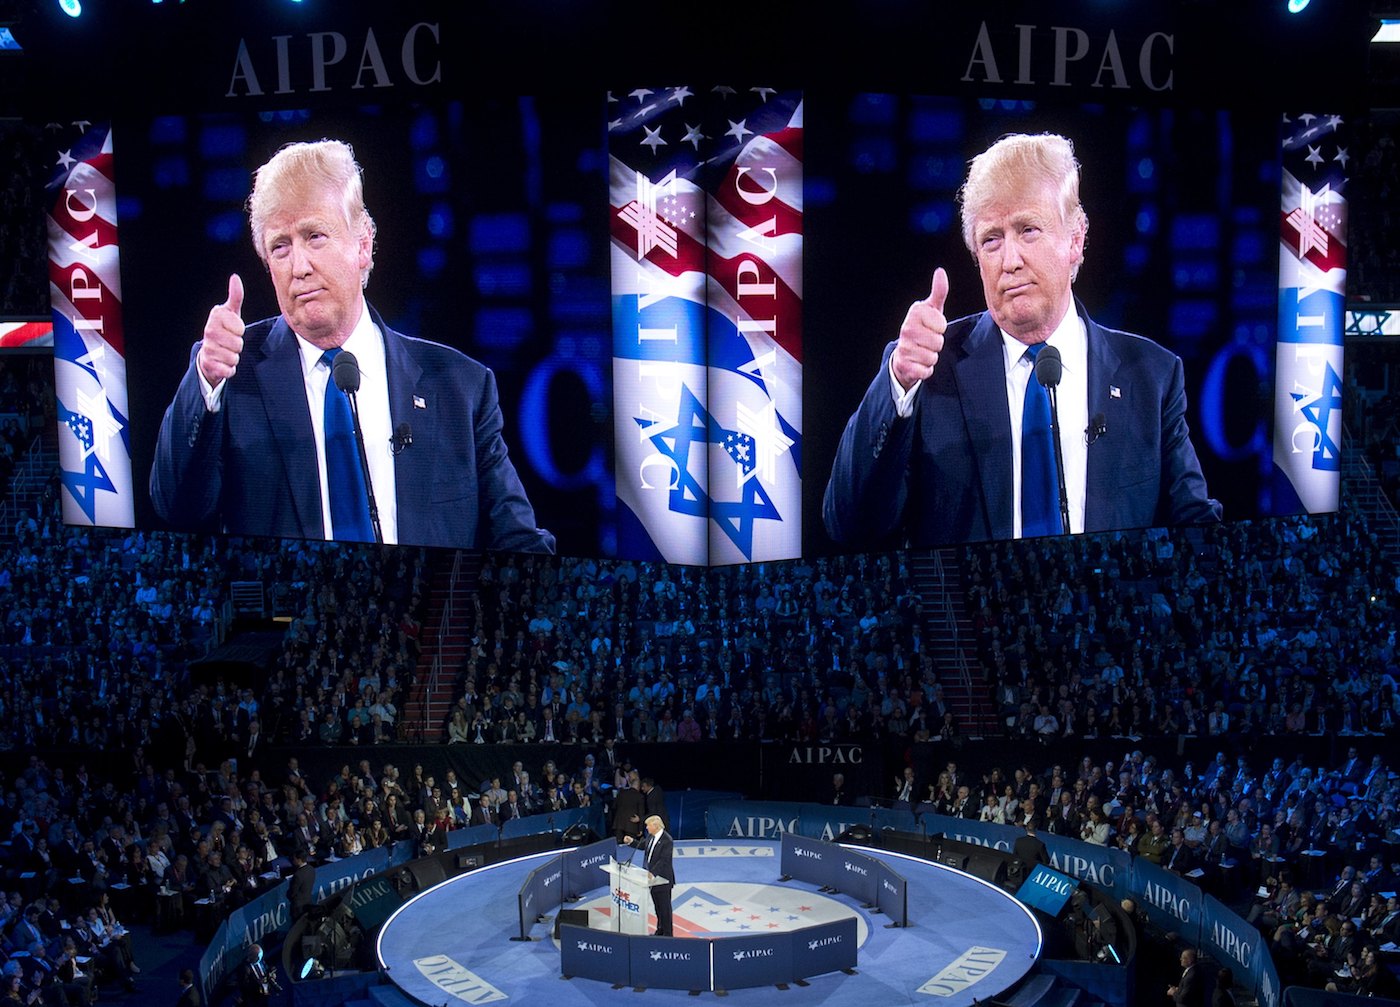 Donald Trump received raucous applause during a speech at the 2016 AIPAC conference (AFP/File photo)